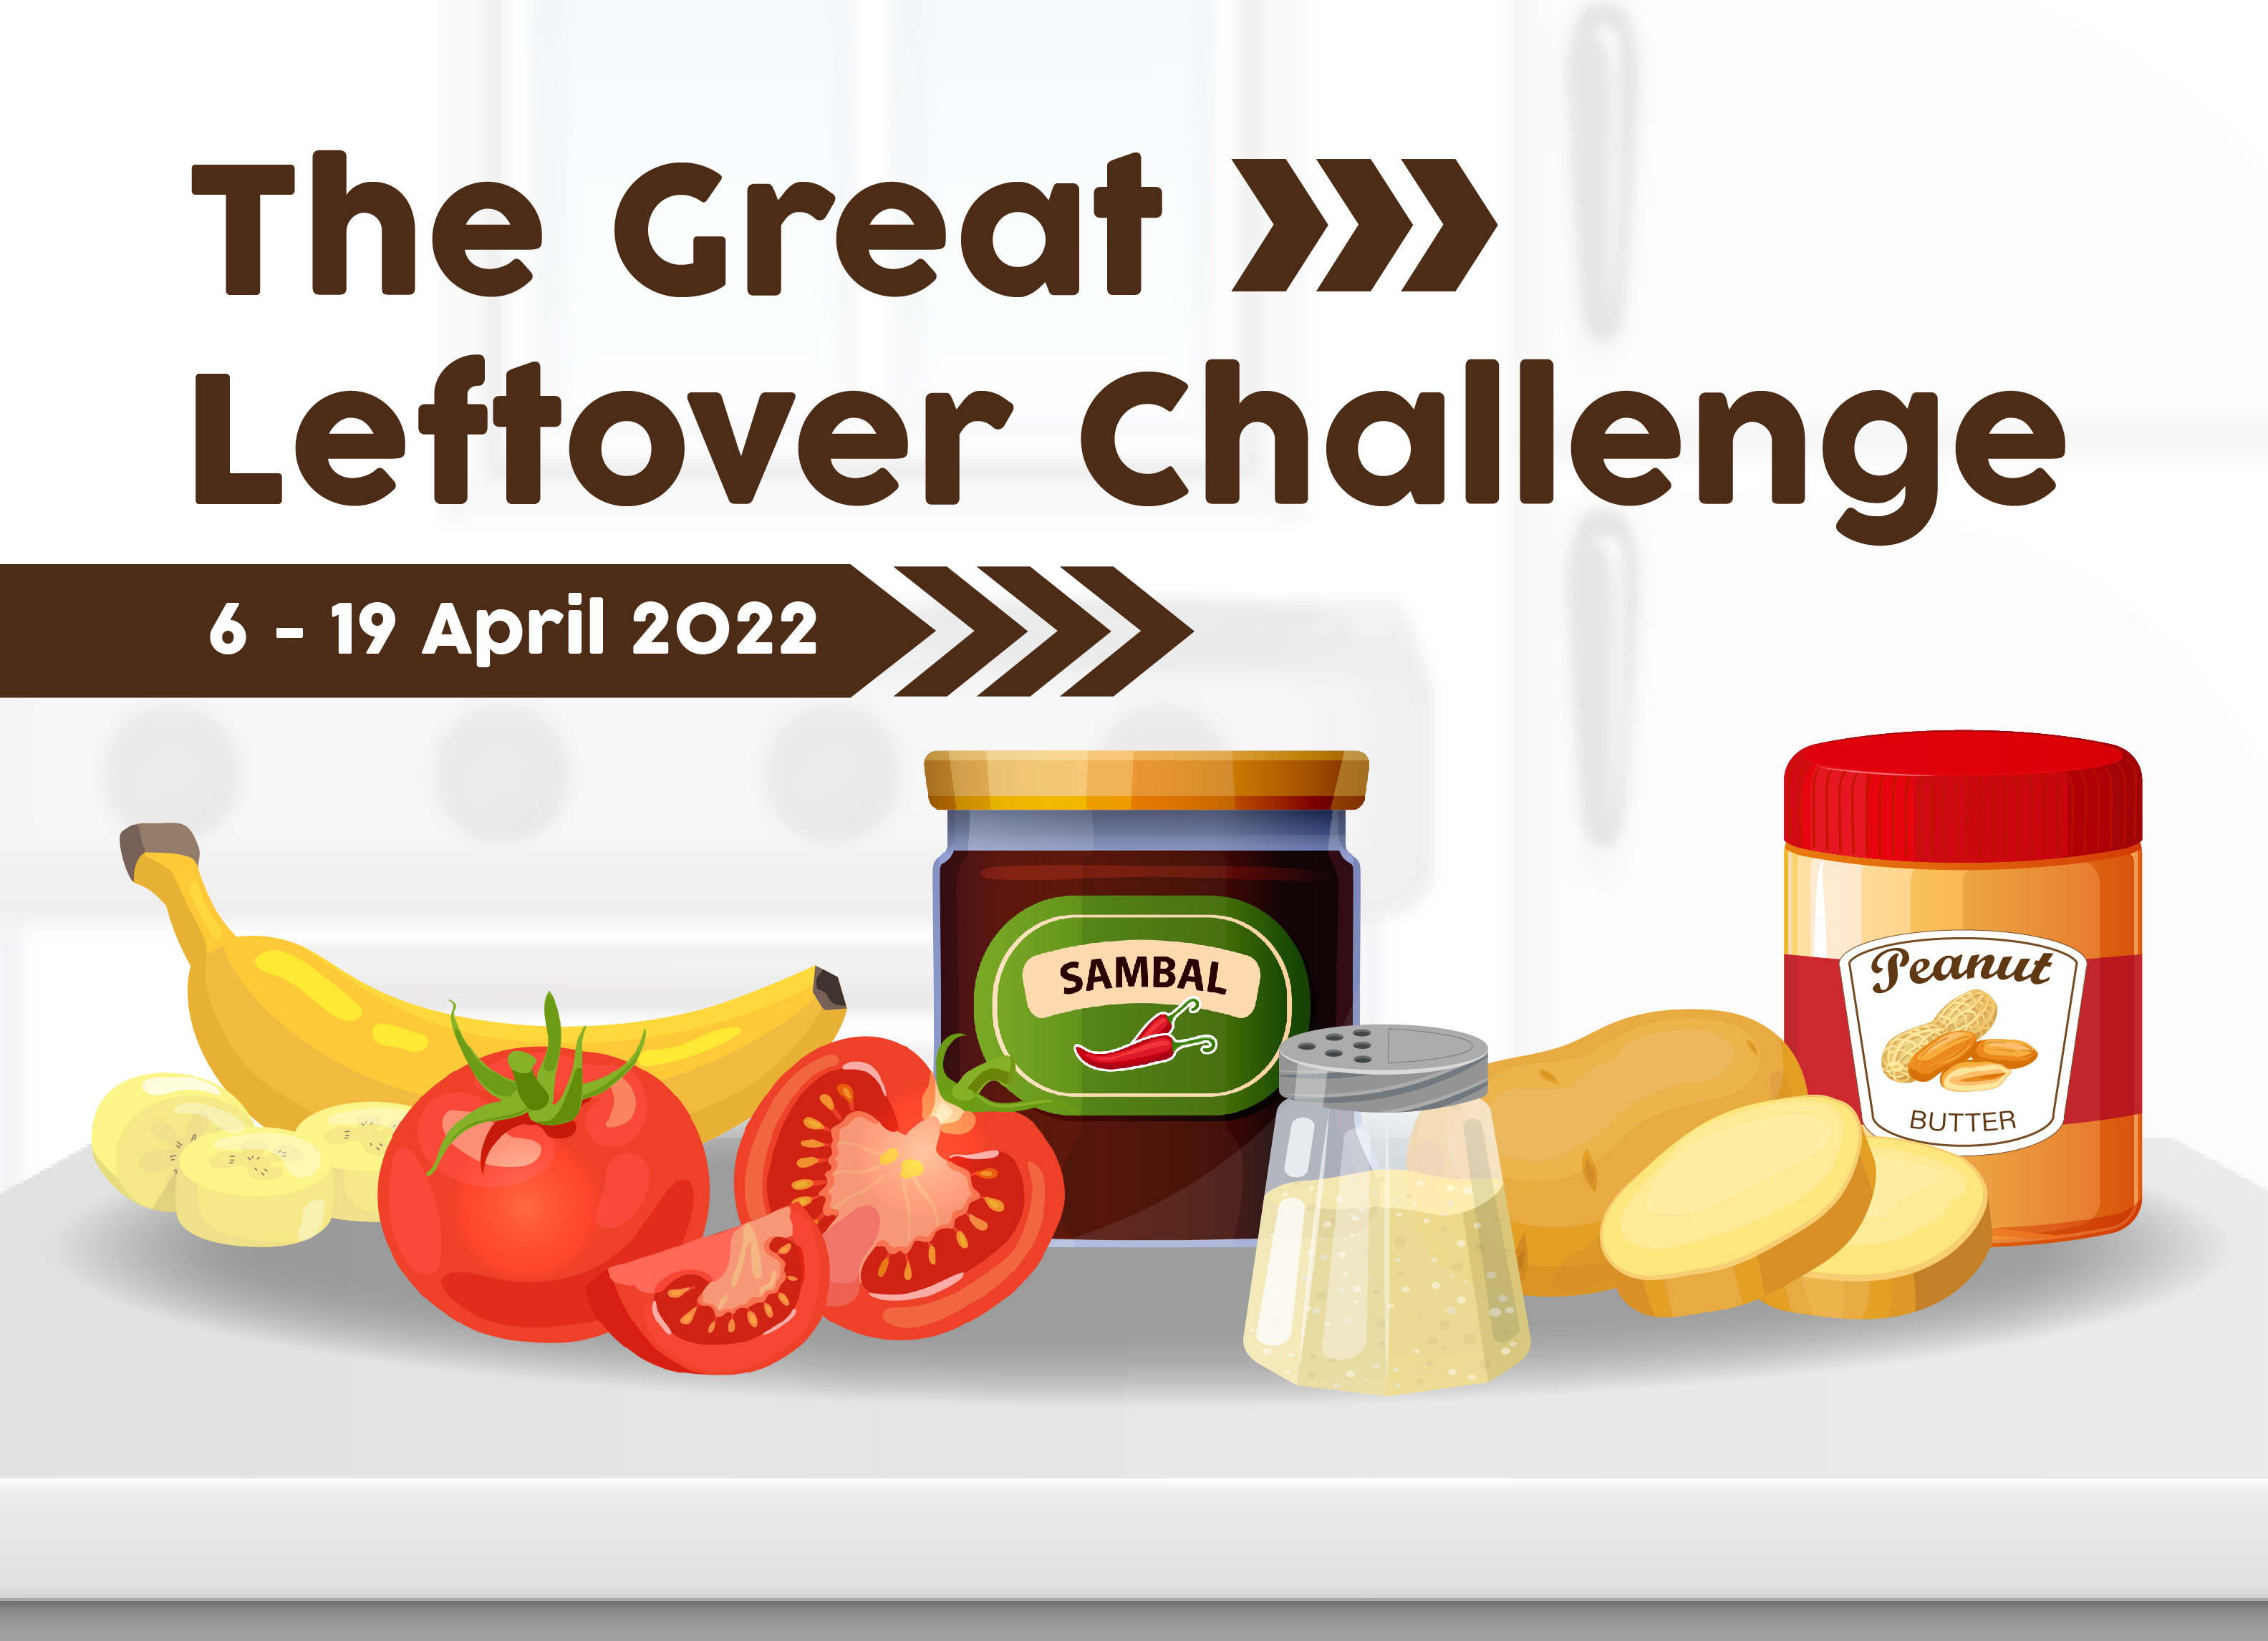 The Great Leftover Challenge Facebook Contest